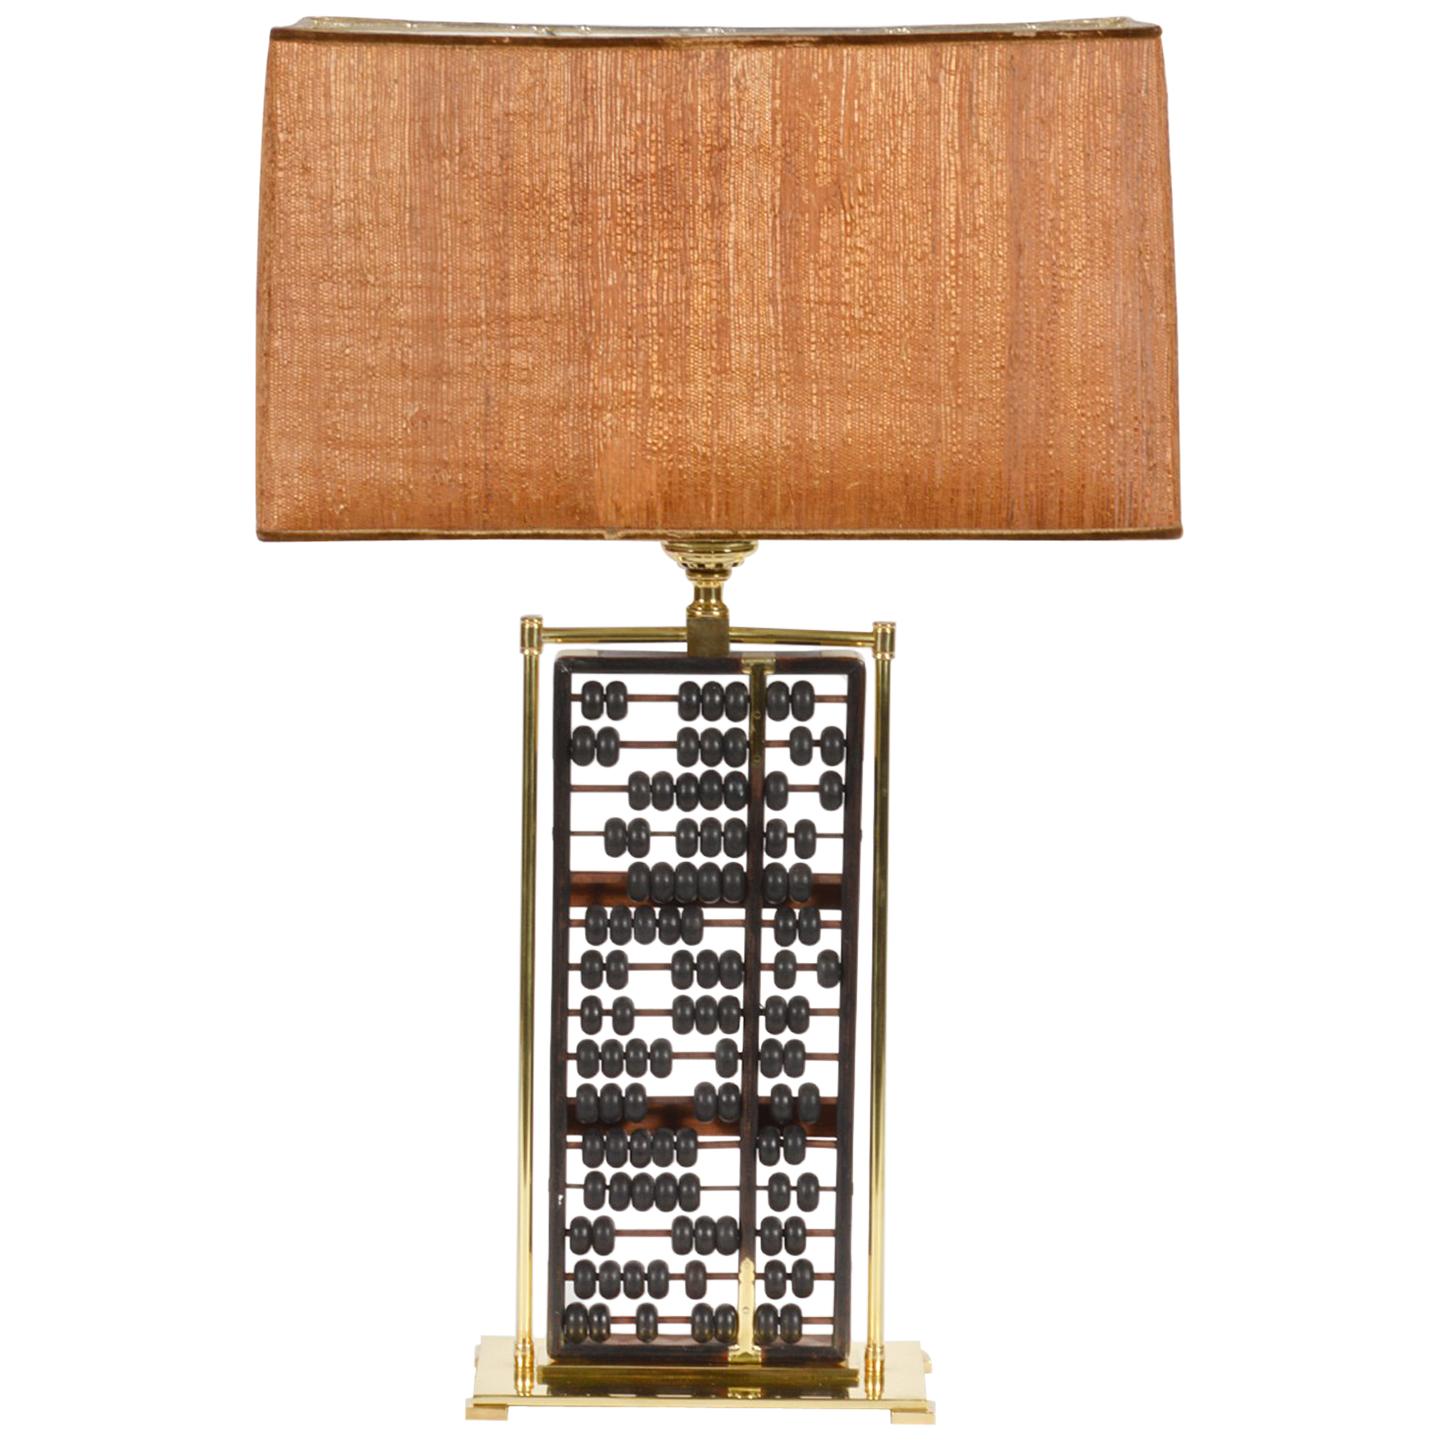 Midcentury Table Lamp with Antique Chinese Abacus in a Brass Frame Work